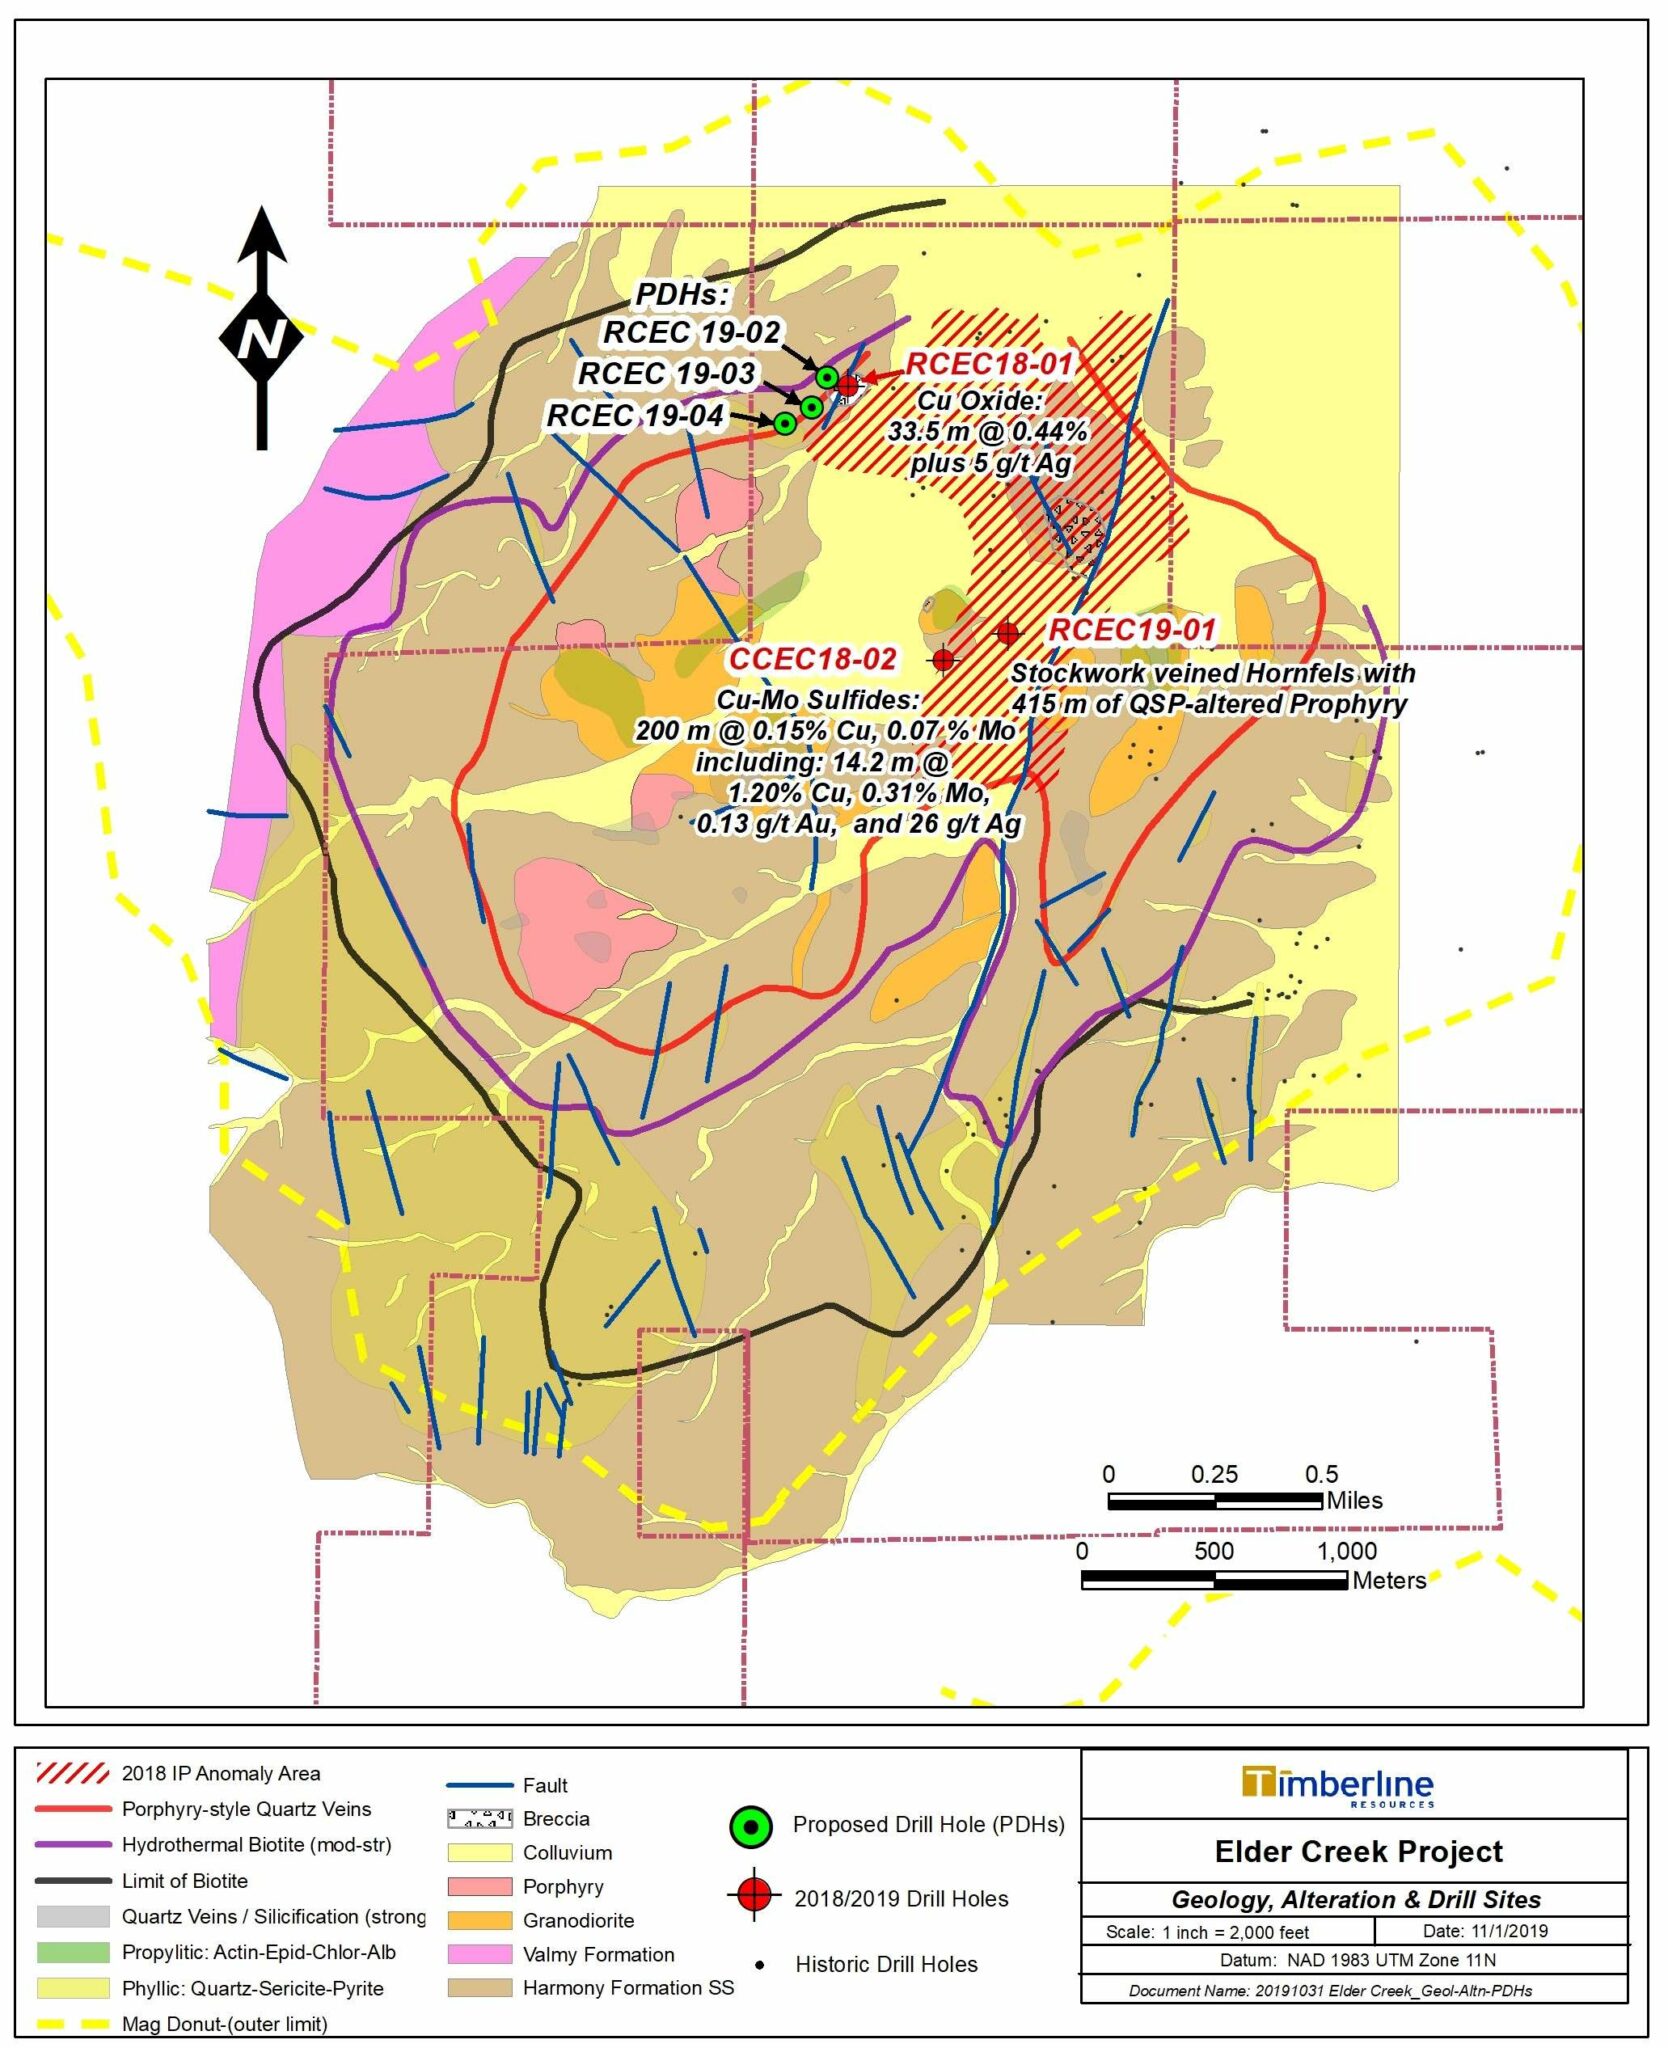 Timberline Resources Corporation, Monday, November 4, 2019, Press release picture